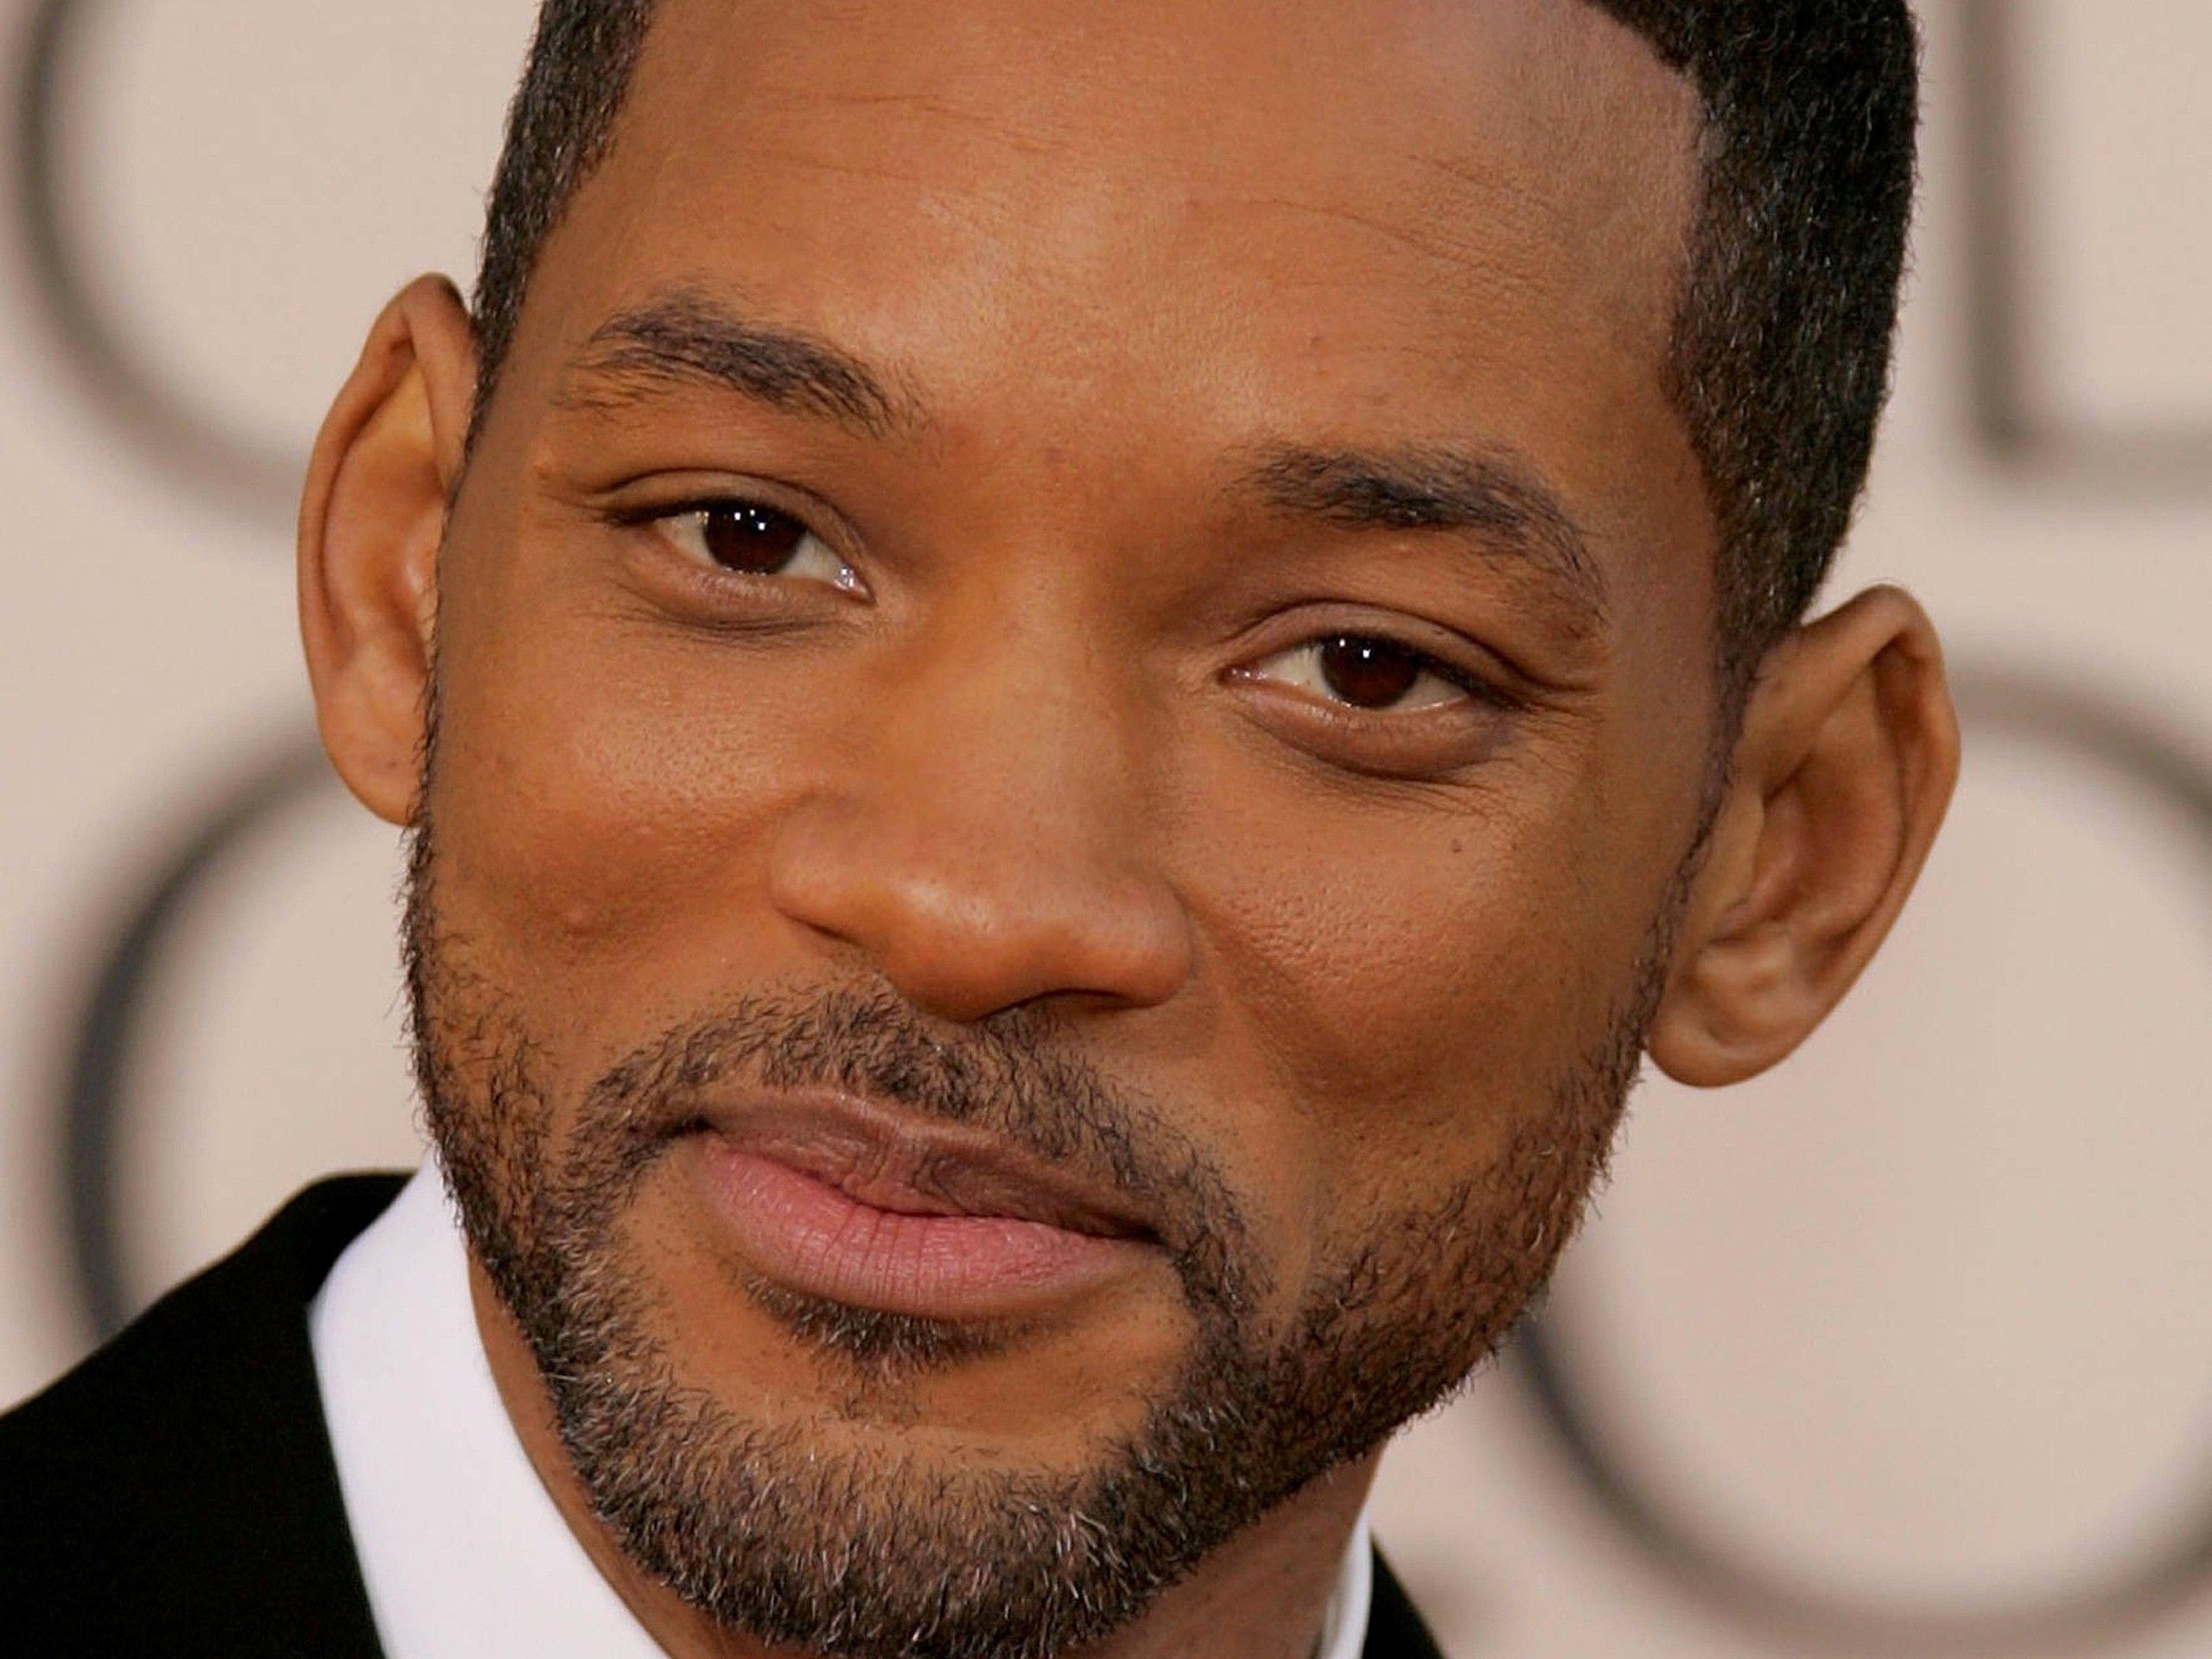 Will Smith: American actor and musician, received multiple accolades, Academy Award, British Academy Film Award. 2560x1920 HD Wallpaper.